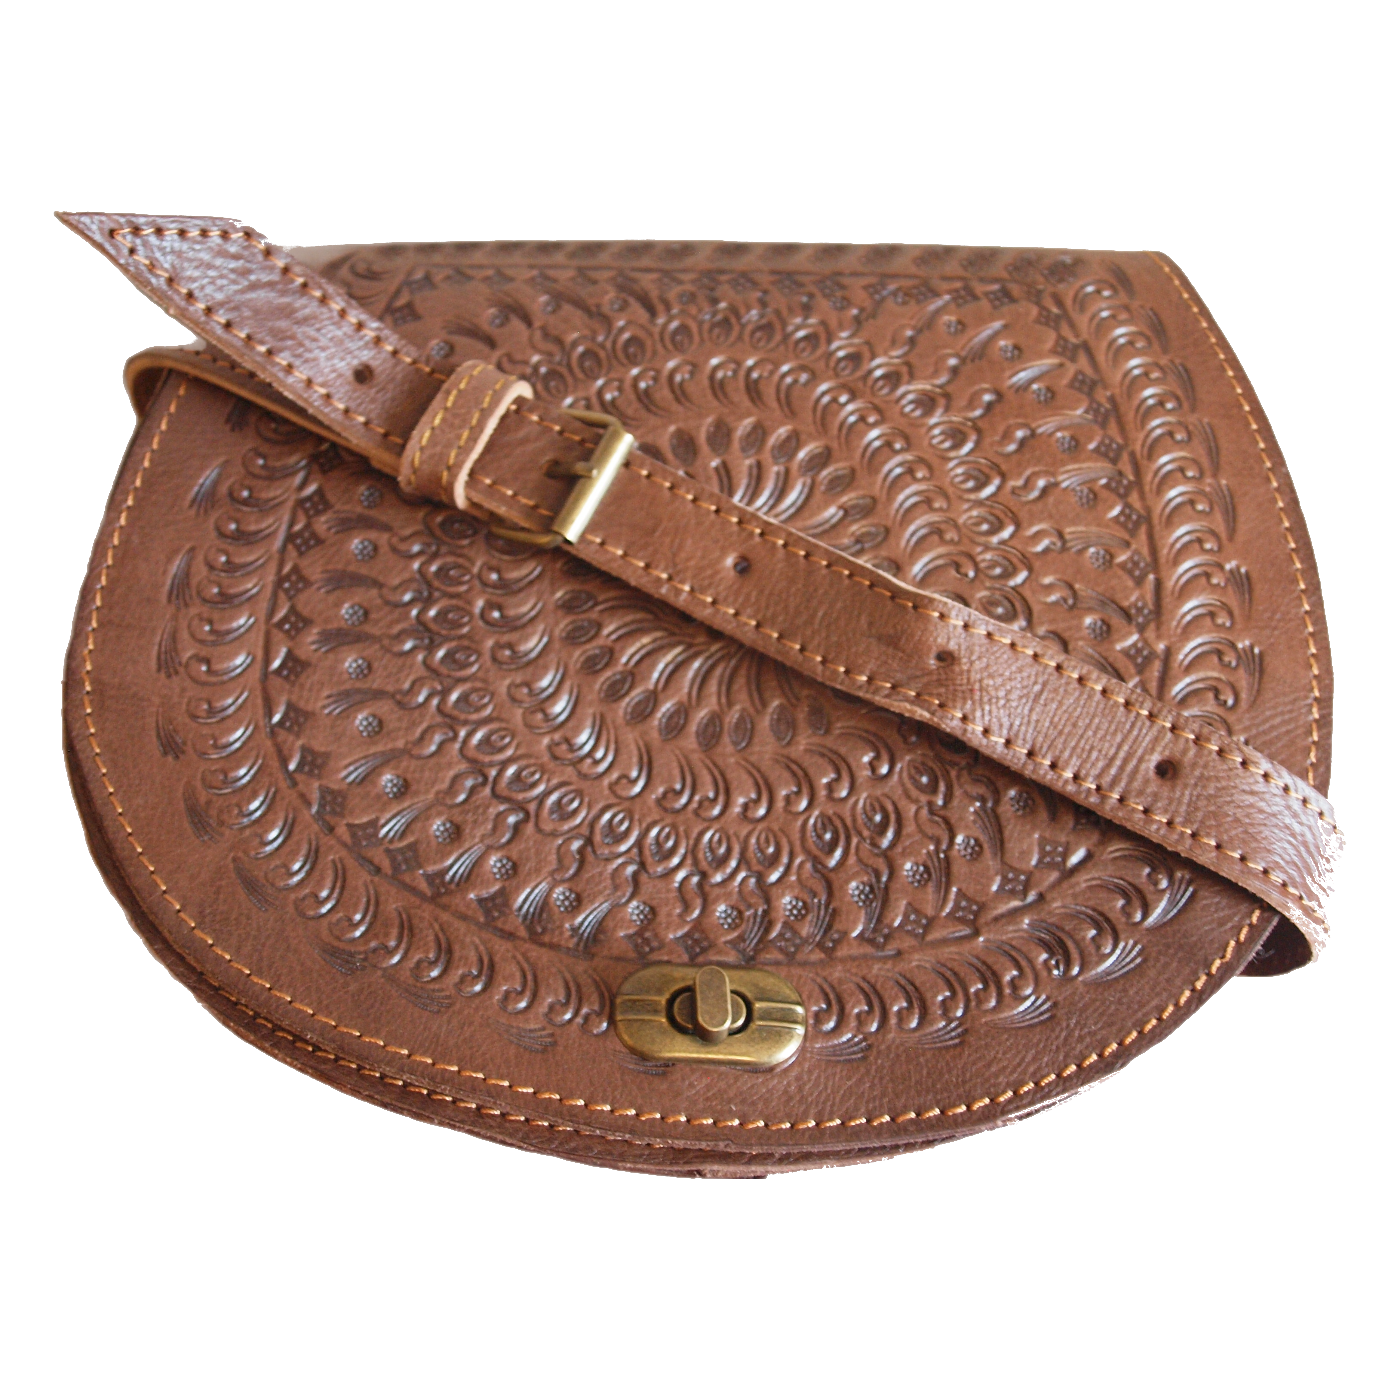 The Temara Embossed Saddle Bag in Brown on White Background